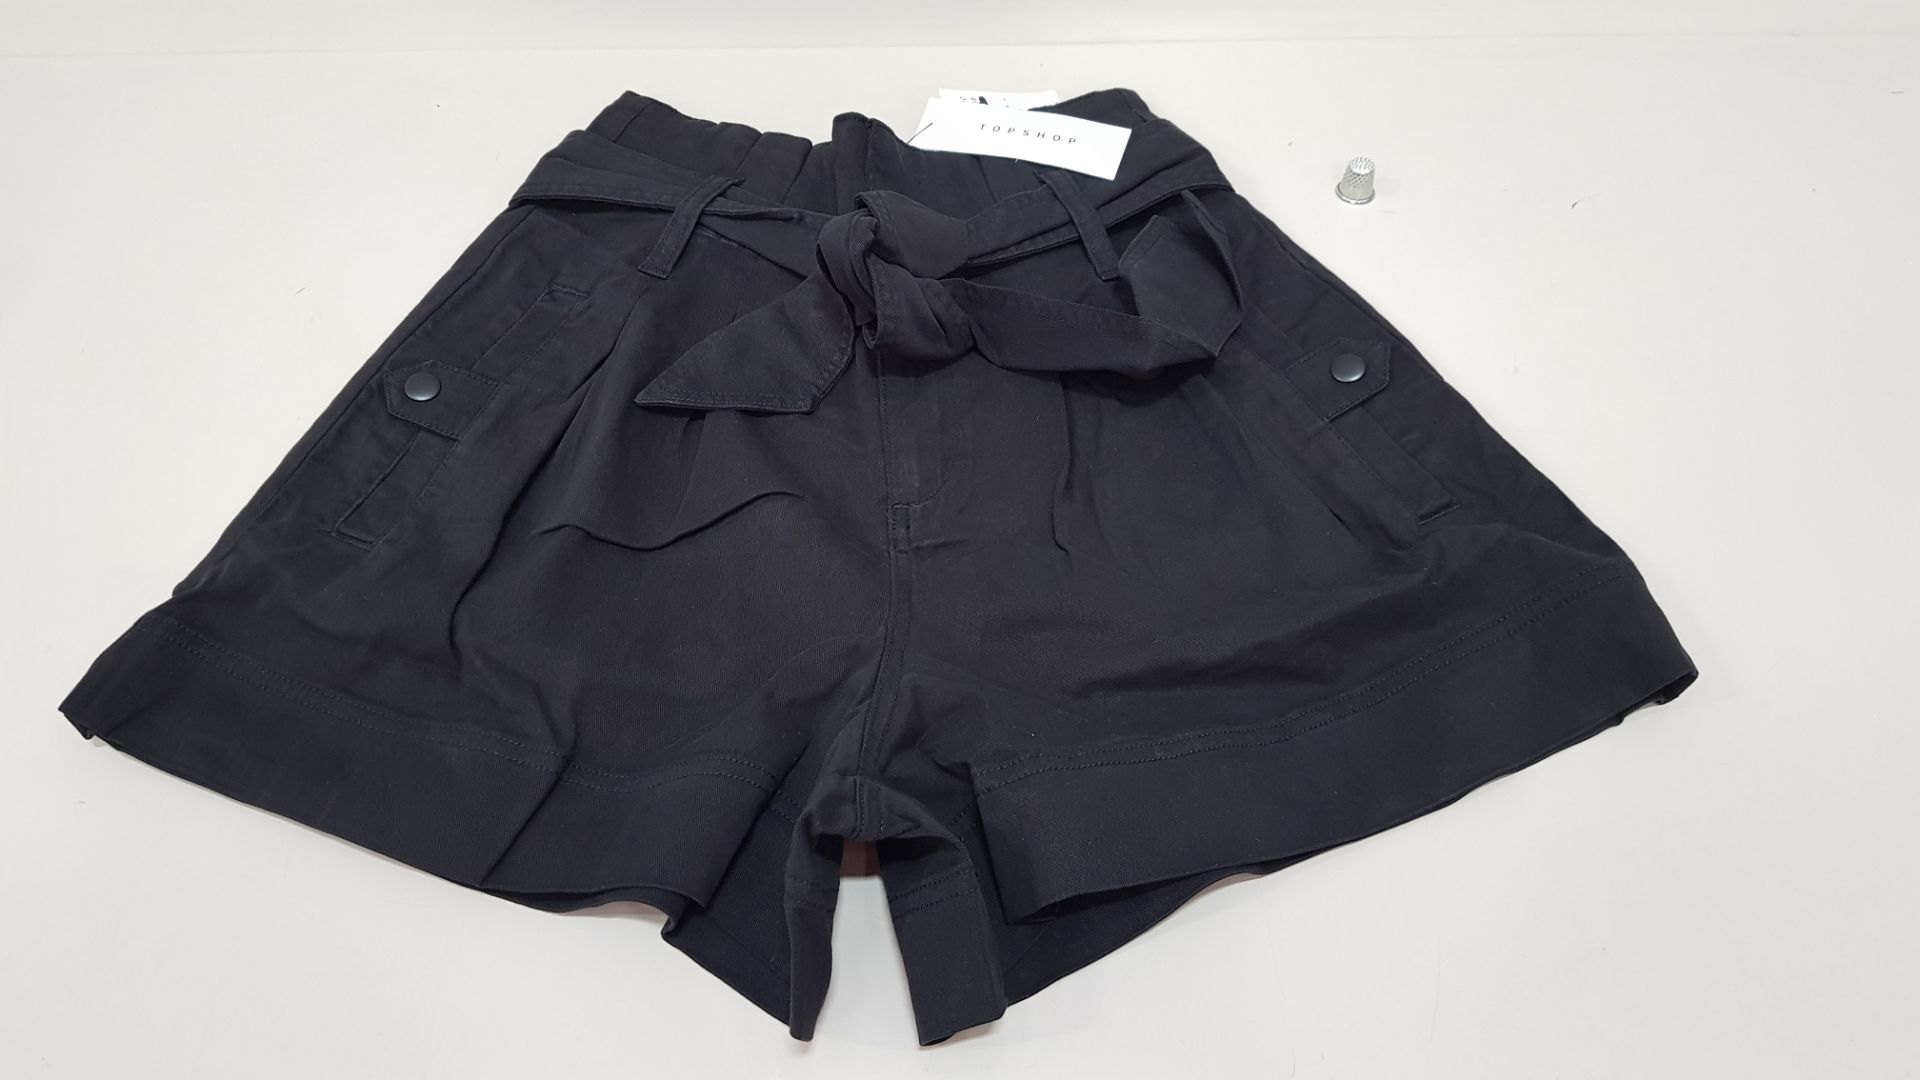 18 X BRAND NEW TOPSHOP SHORTS UK SIZE 10 RRP £29.00 (TOTAL RRP £522.00)